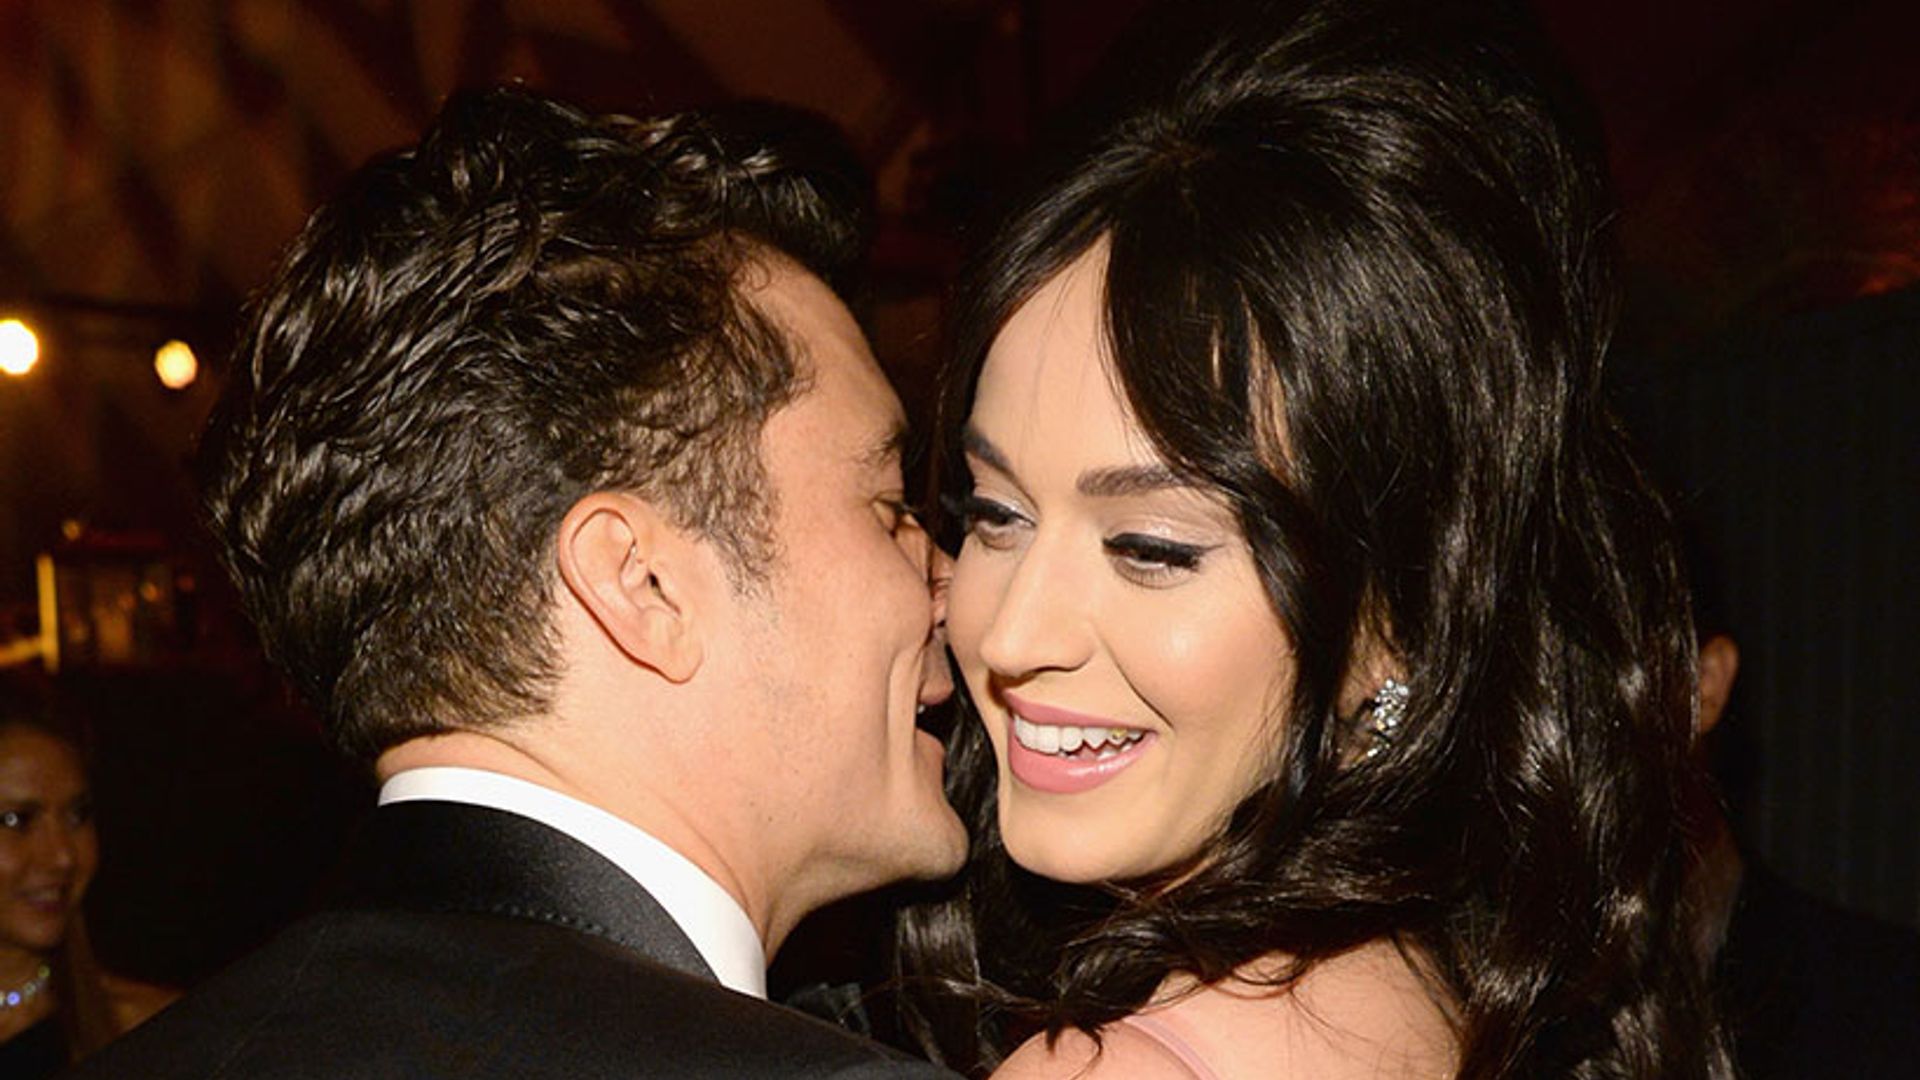 Katy Perry surprises Orlando Bloom with star-studded 40th birthday party